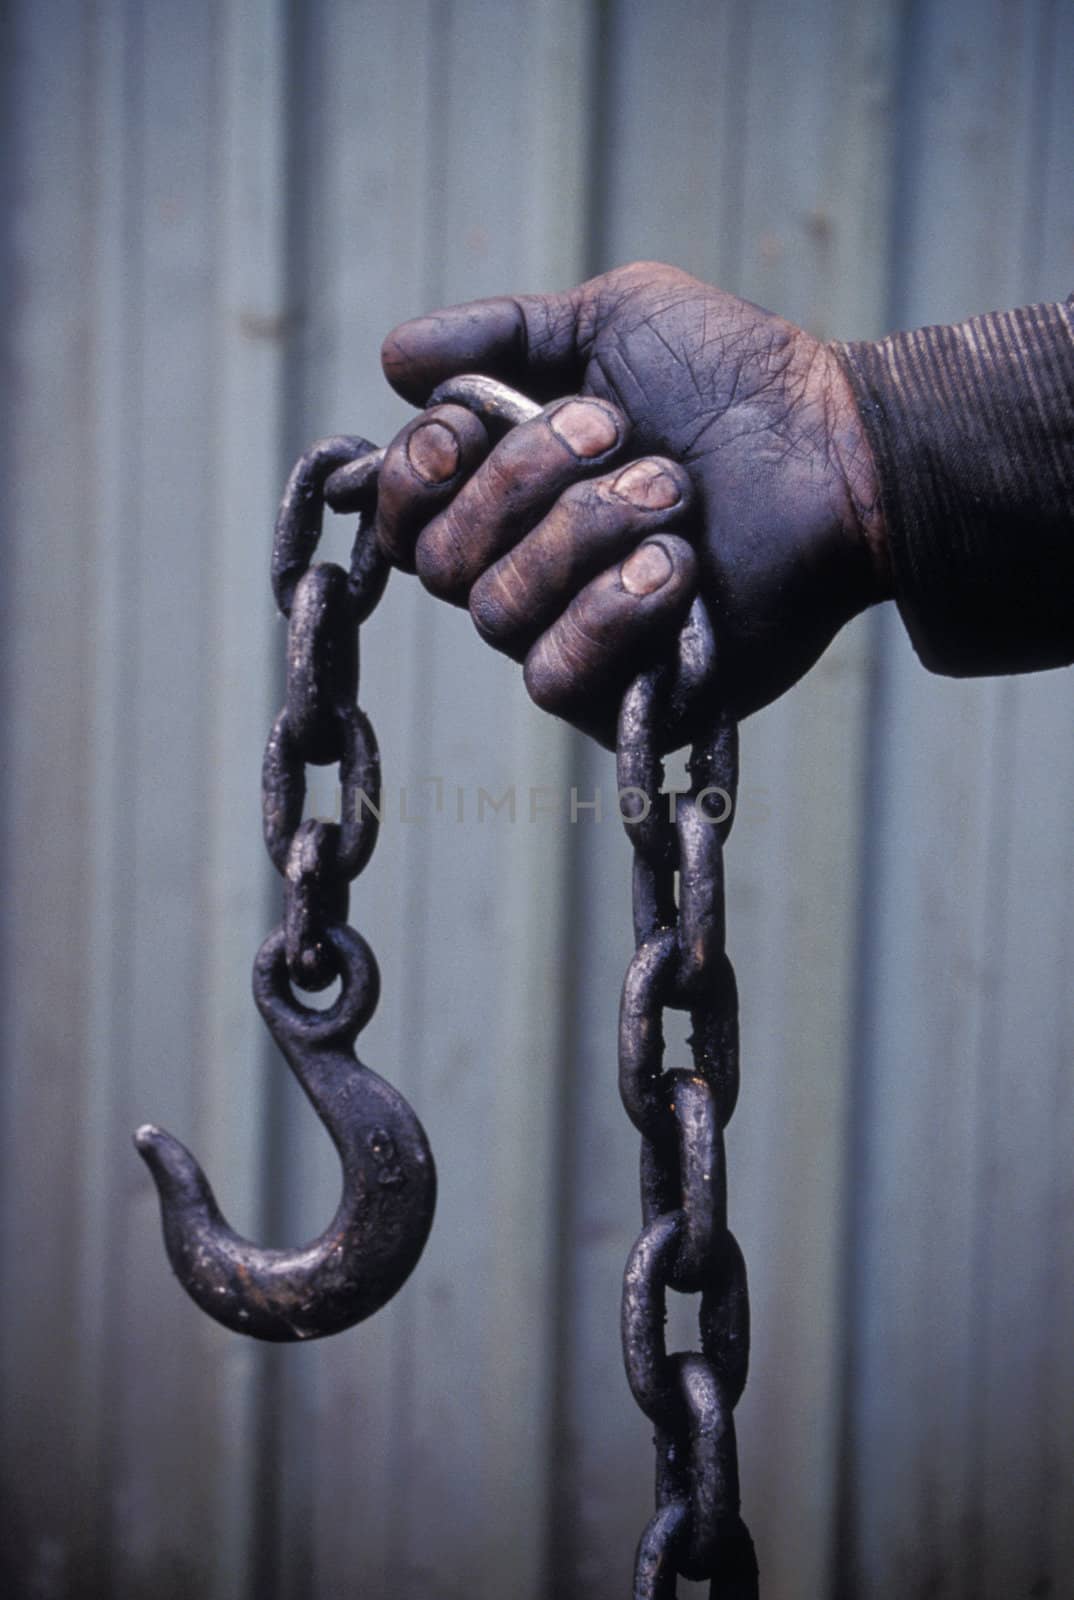 Workers hand holding a chain and hook